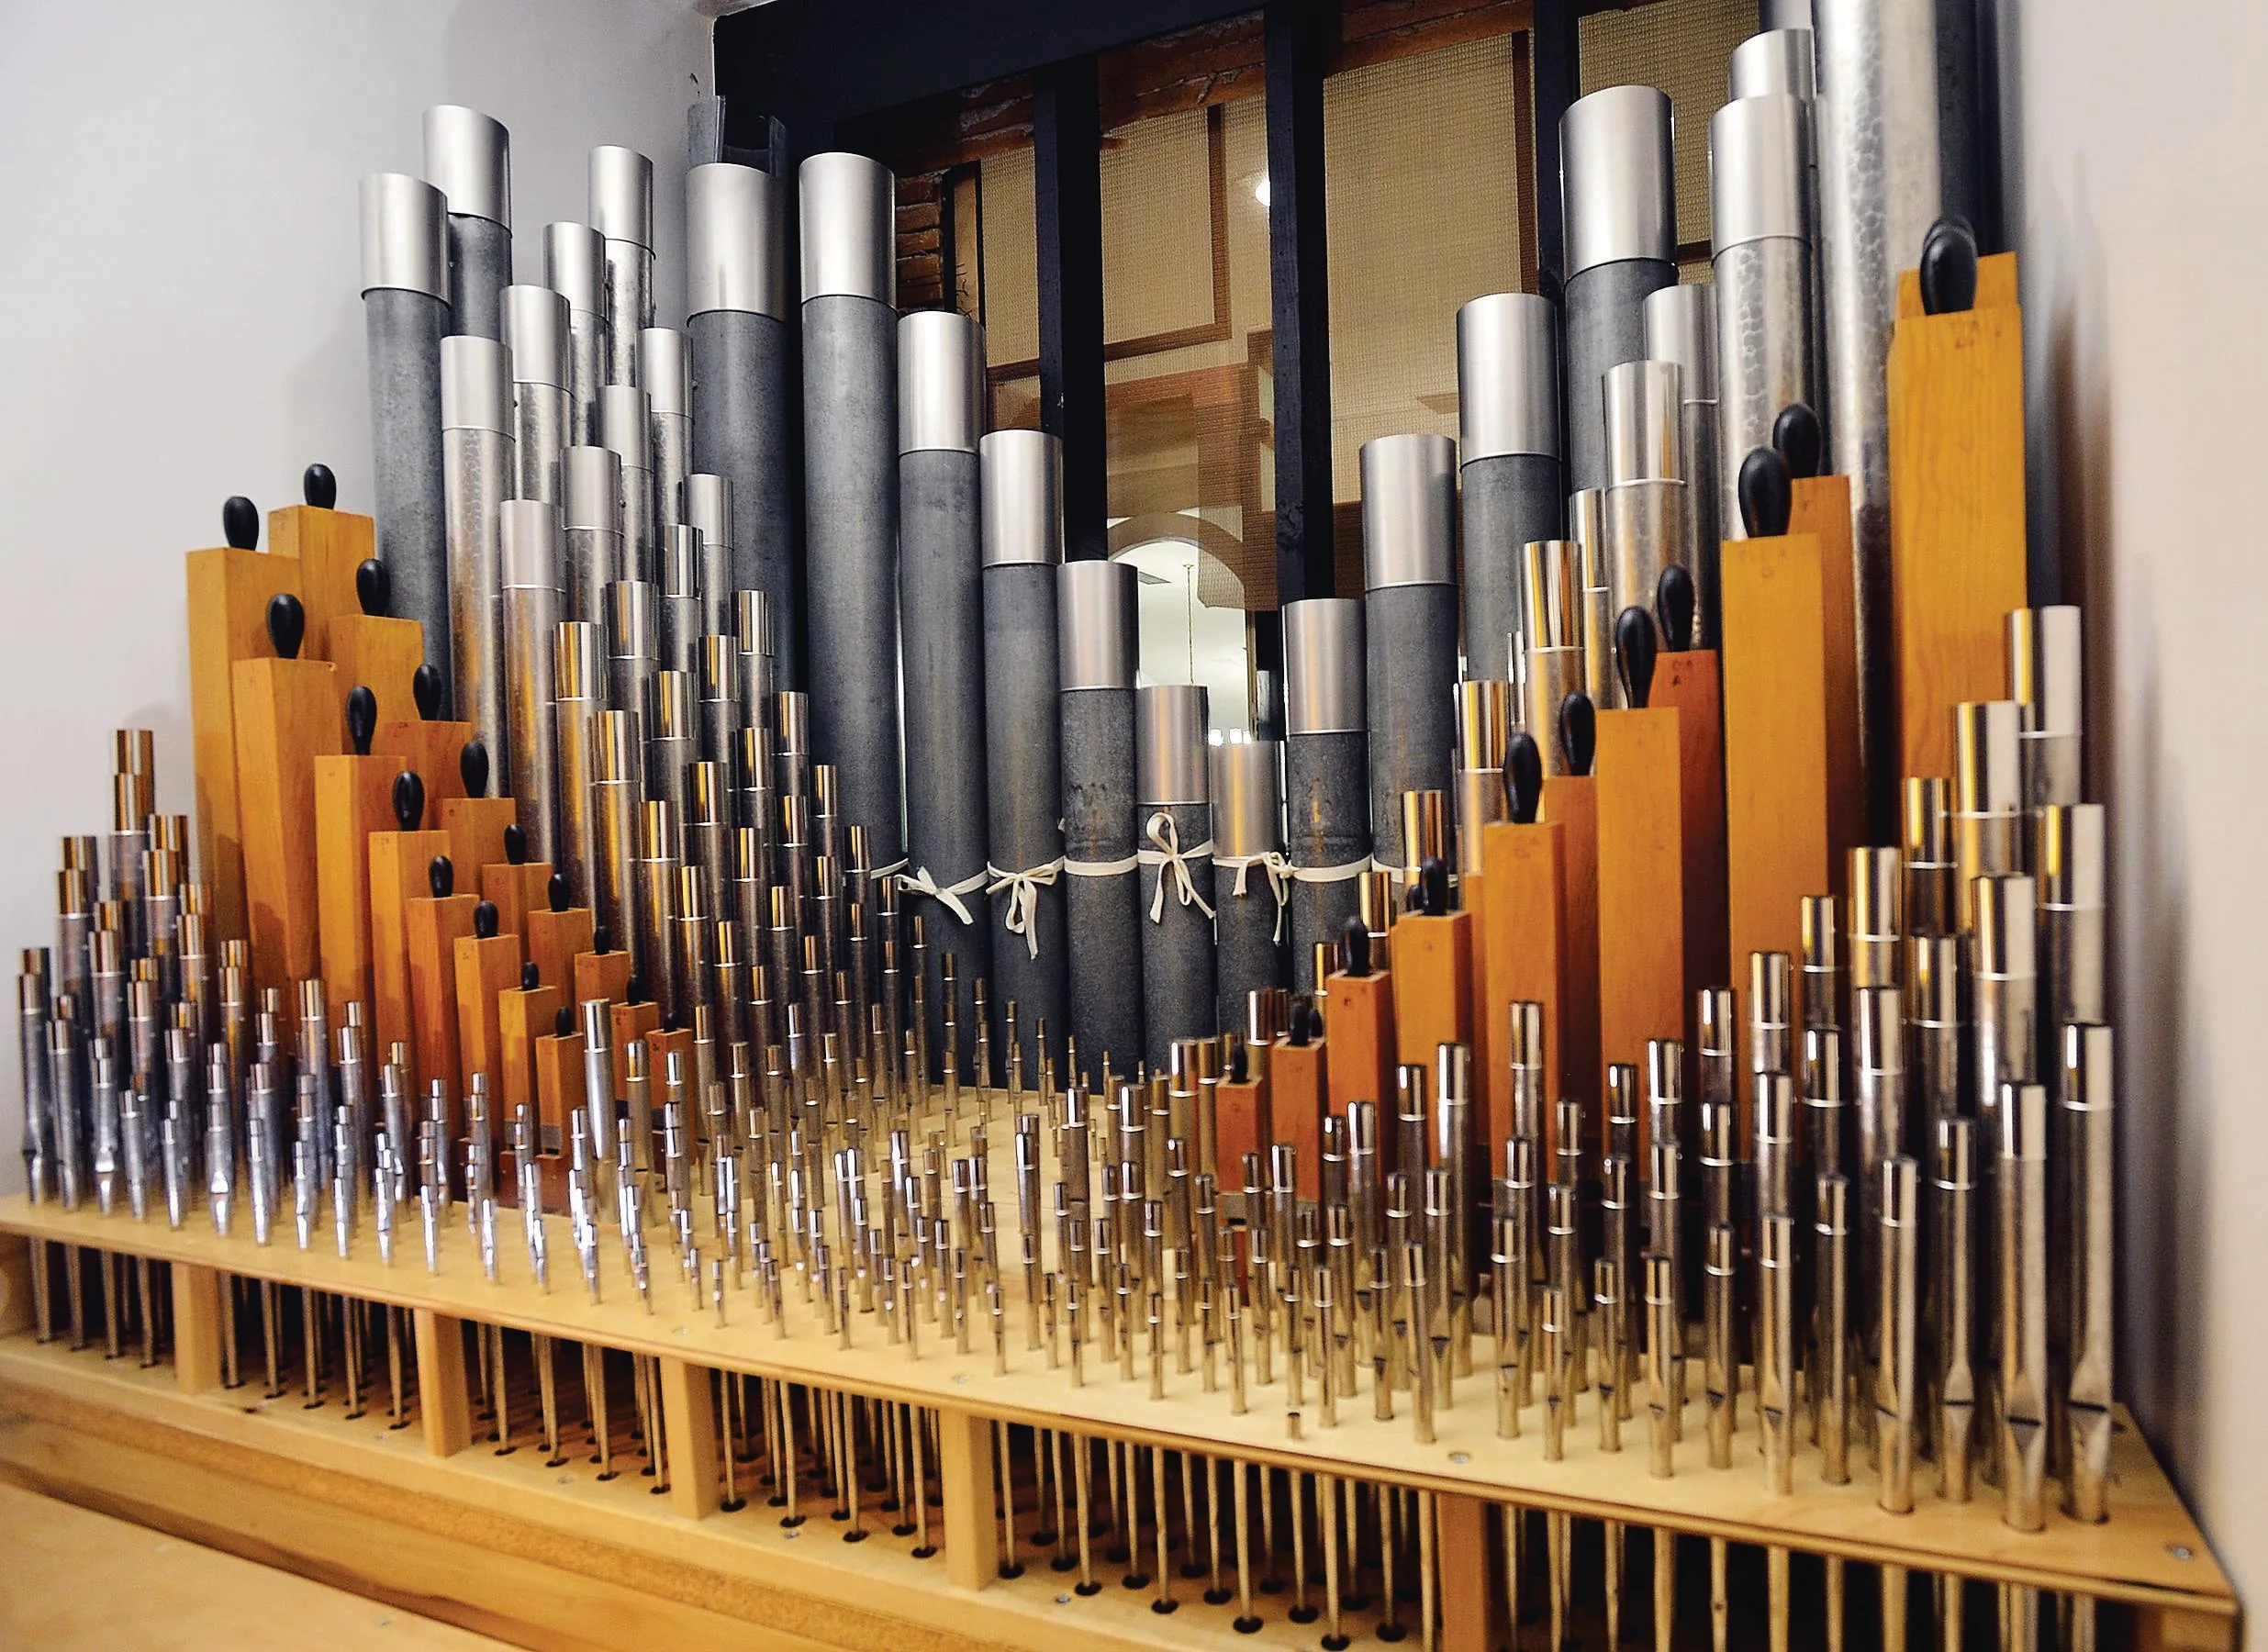 Pipe Organ: Hagerstown church, 1929 Moller organ, The largest type of musical instruments. 2480x1800 HD Wallpaper.